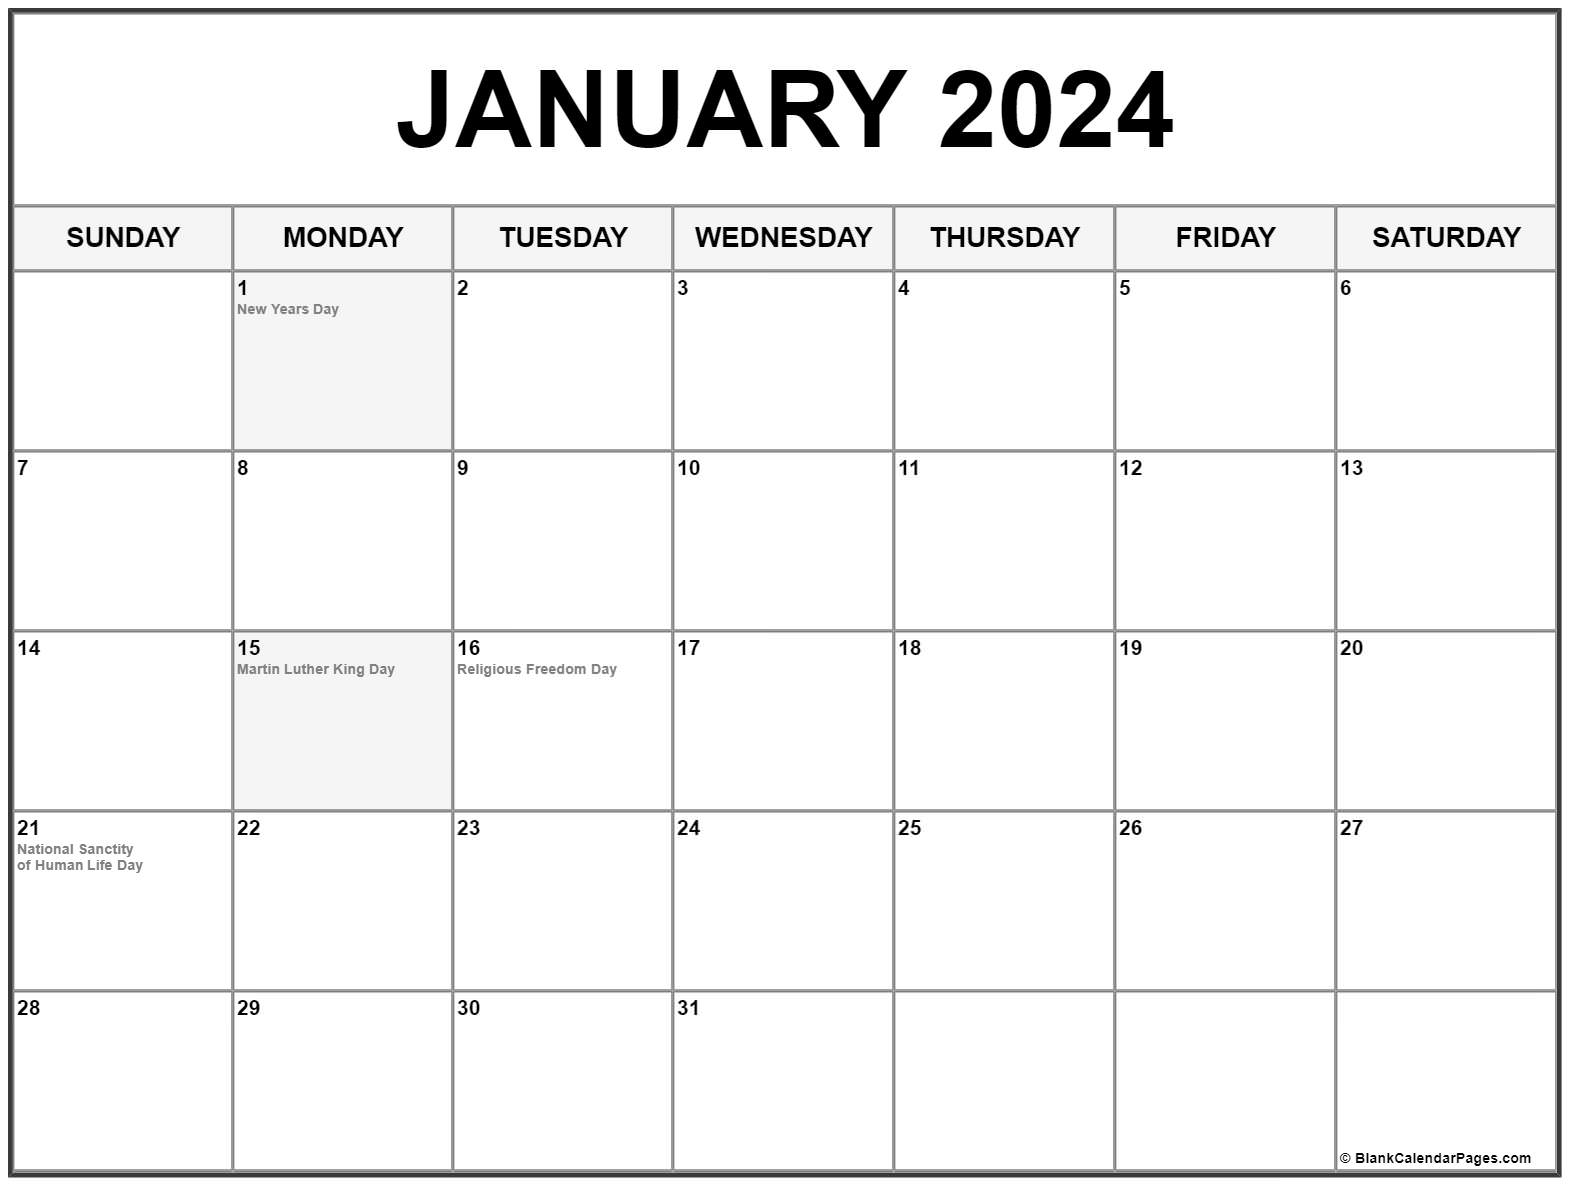 January 2024 With Holidays Calendar for Free Printable January 2024 Calendar With Holidays